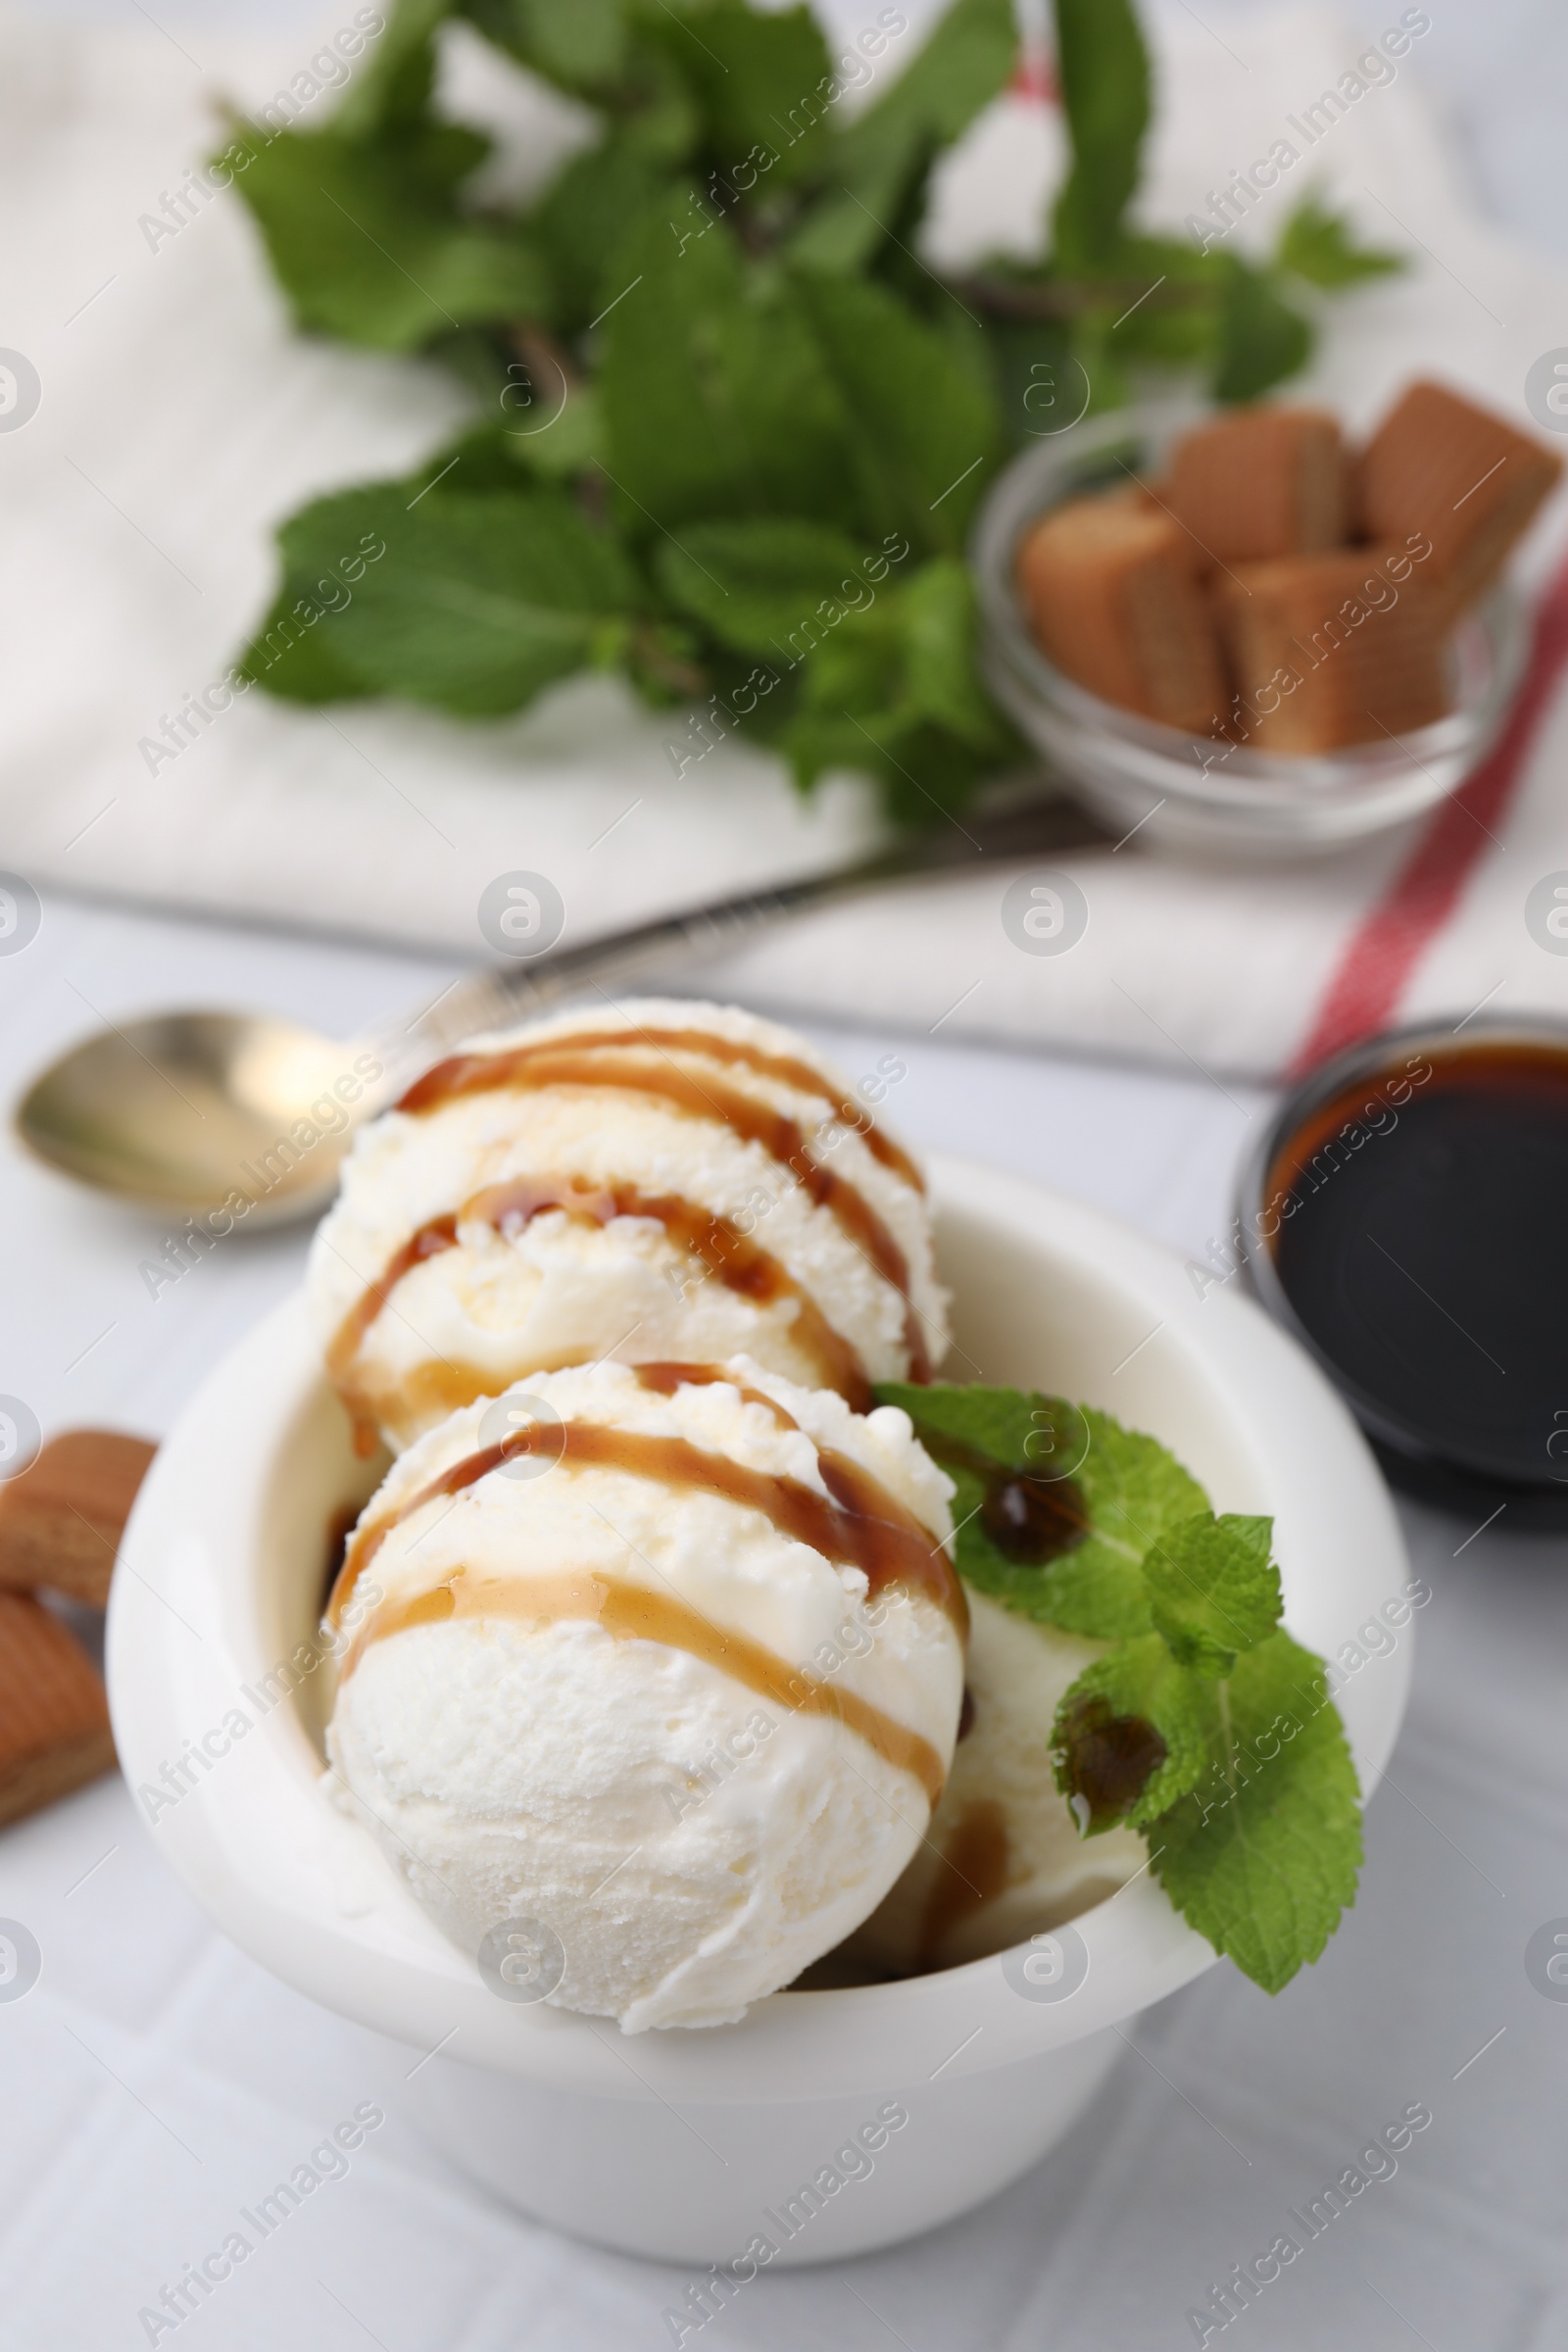 Photo of Scoops of tasty ice cream with mint leaves and caramel sauce on white tiled table